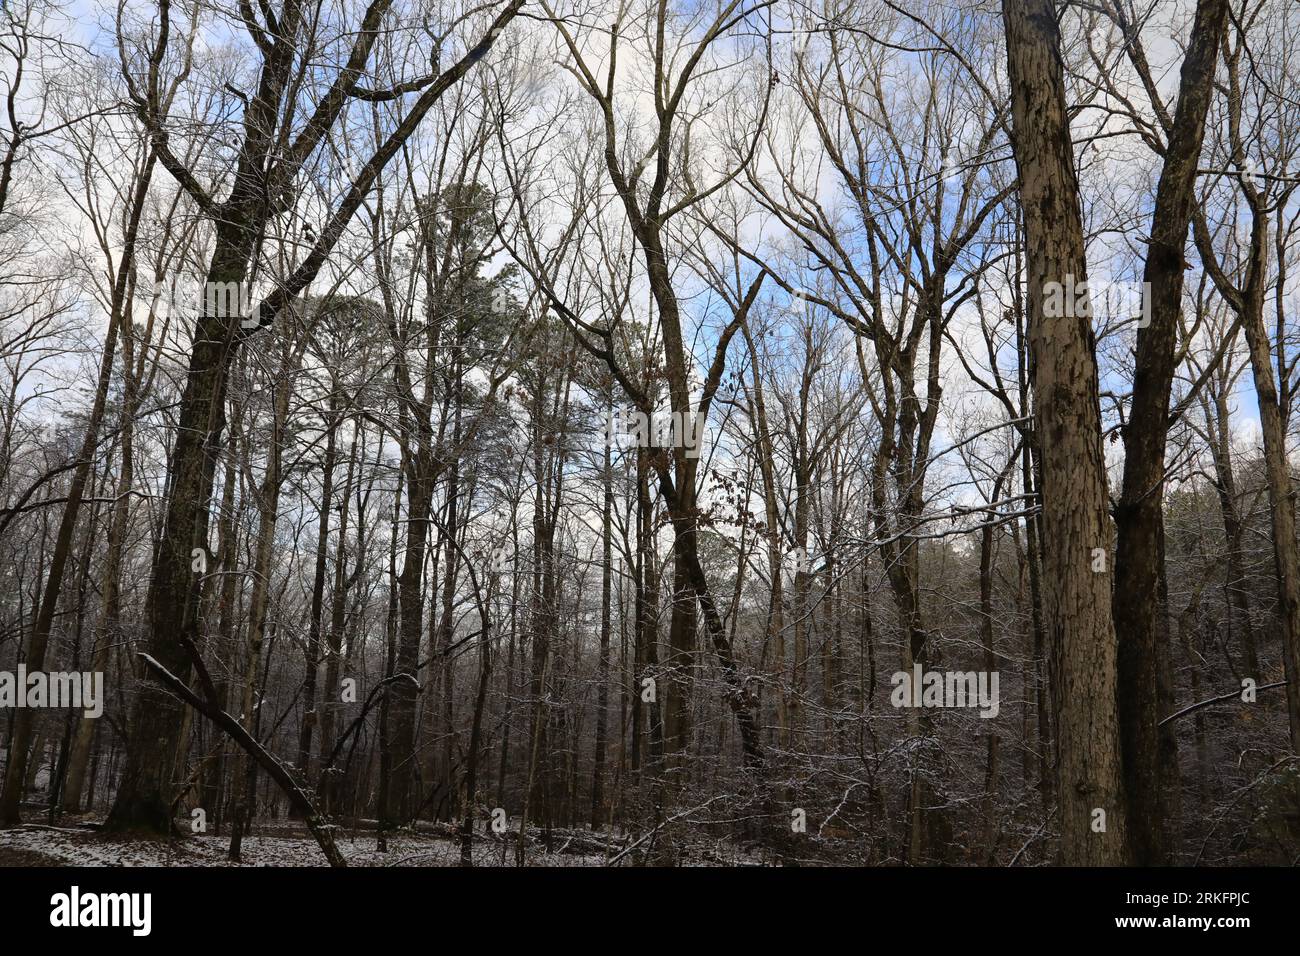 Low angle view of dense tree cover Stock Photo